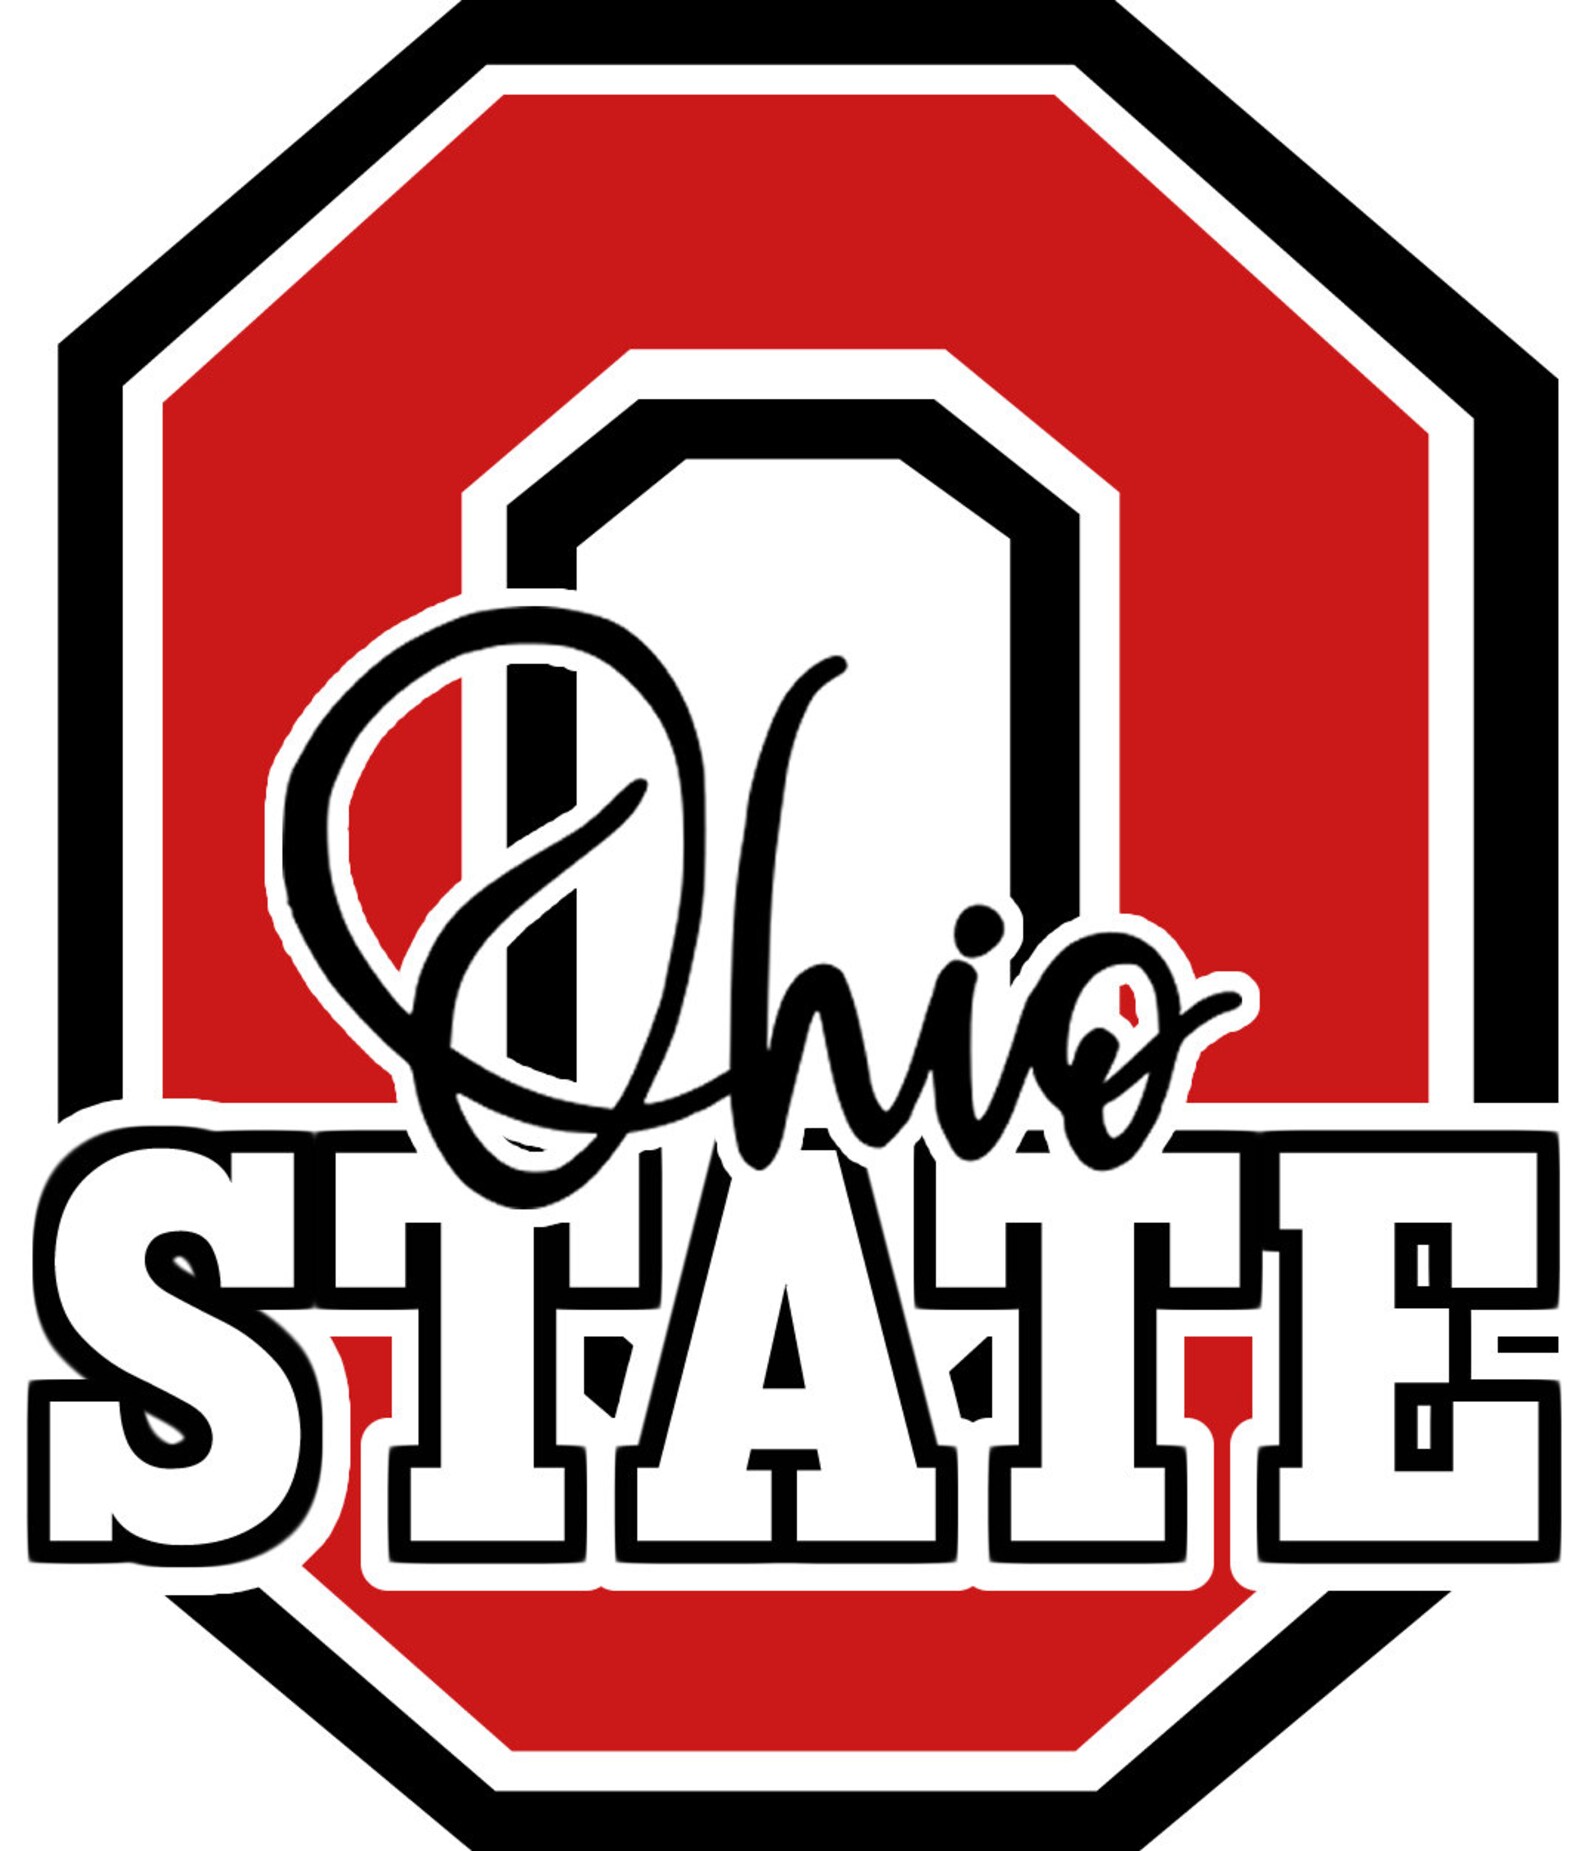 Red logo for Ohio state.